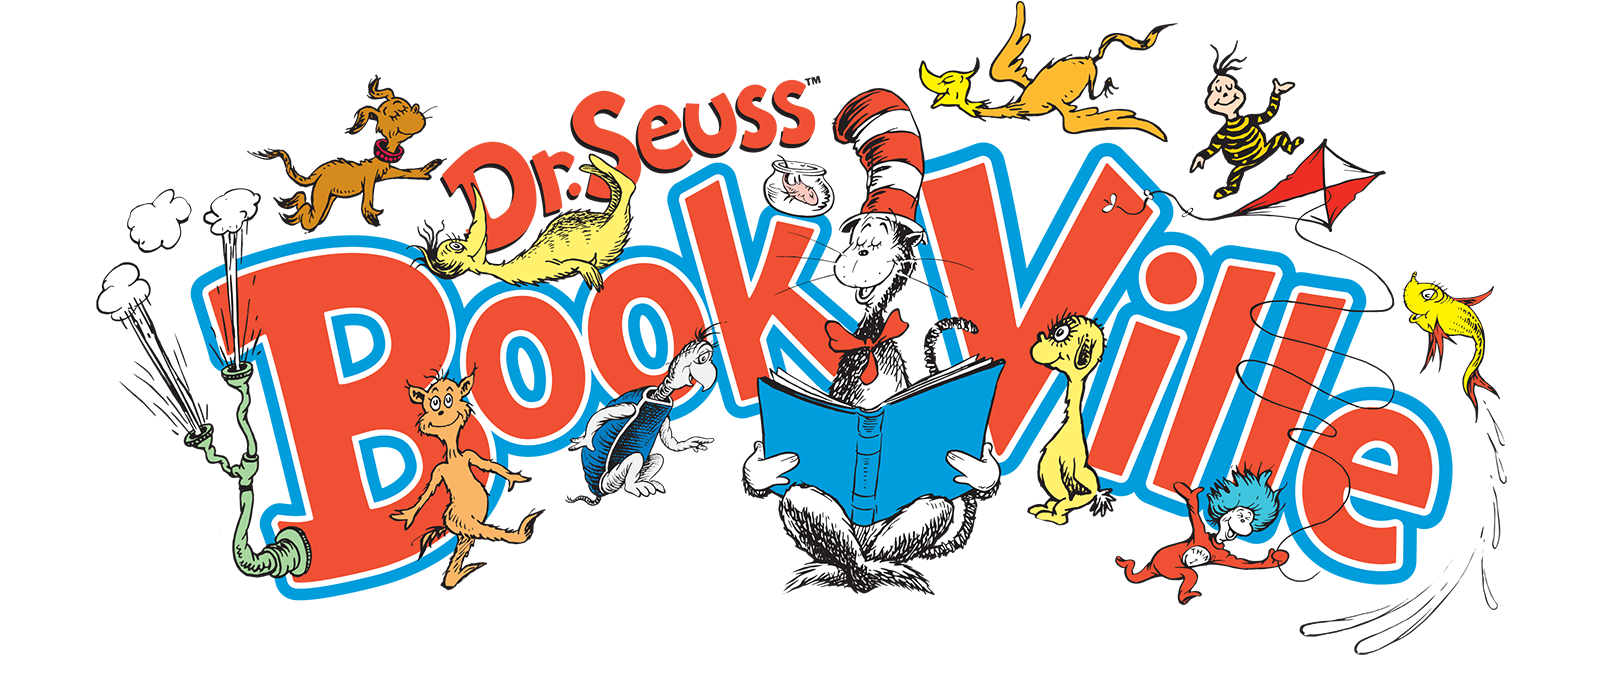 Pages-from-DS_Bookville_Logos_DOT_120613.png